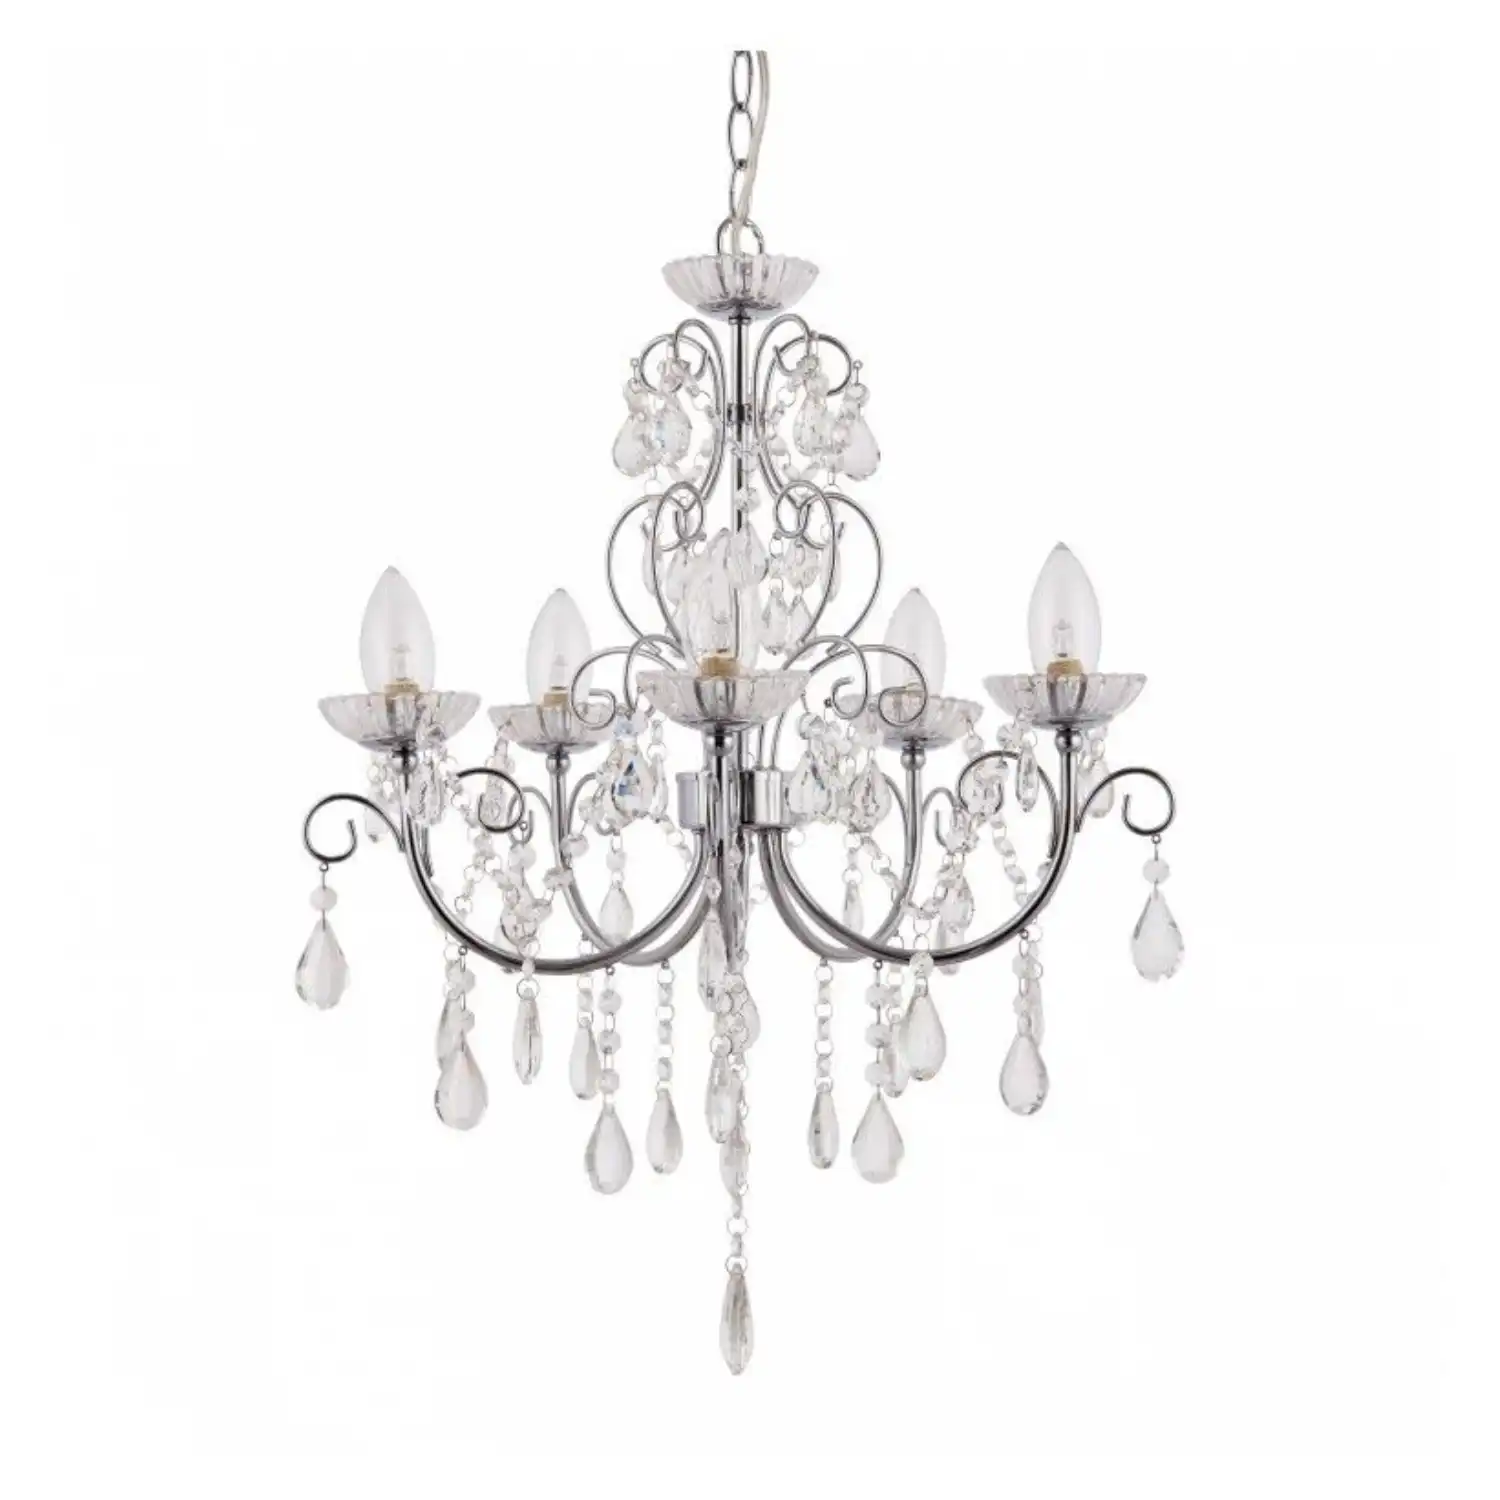 Traditional Chrome Plated Clear Glass Droplets 5 Pendant Light